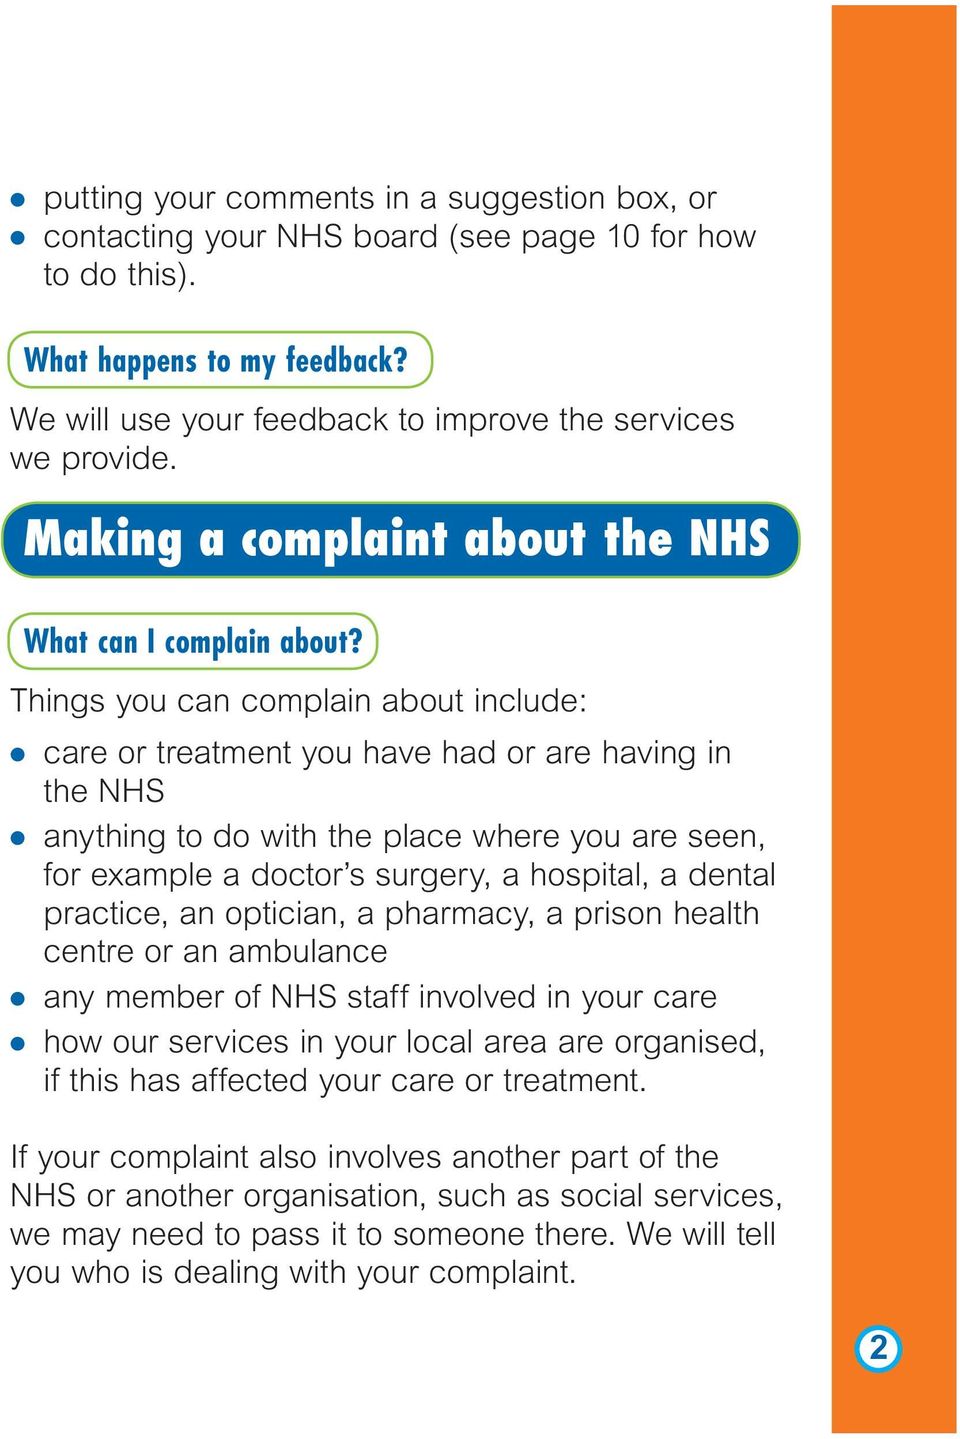 Things you can complain about include: l care or treatment you have had or are having in the NHS l anything to do with the place where you are seen, for example a doctor s surgery, a hospital, a